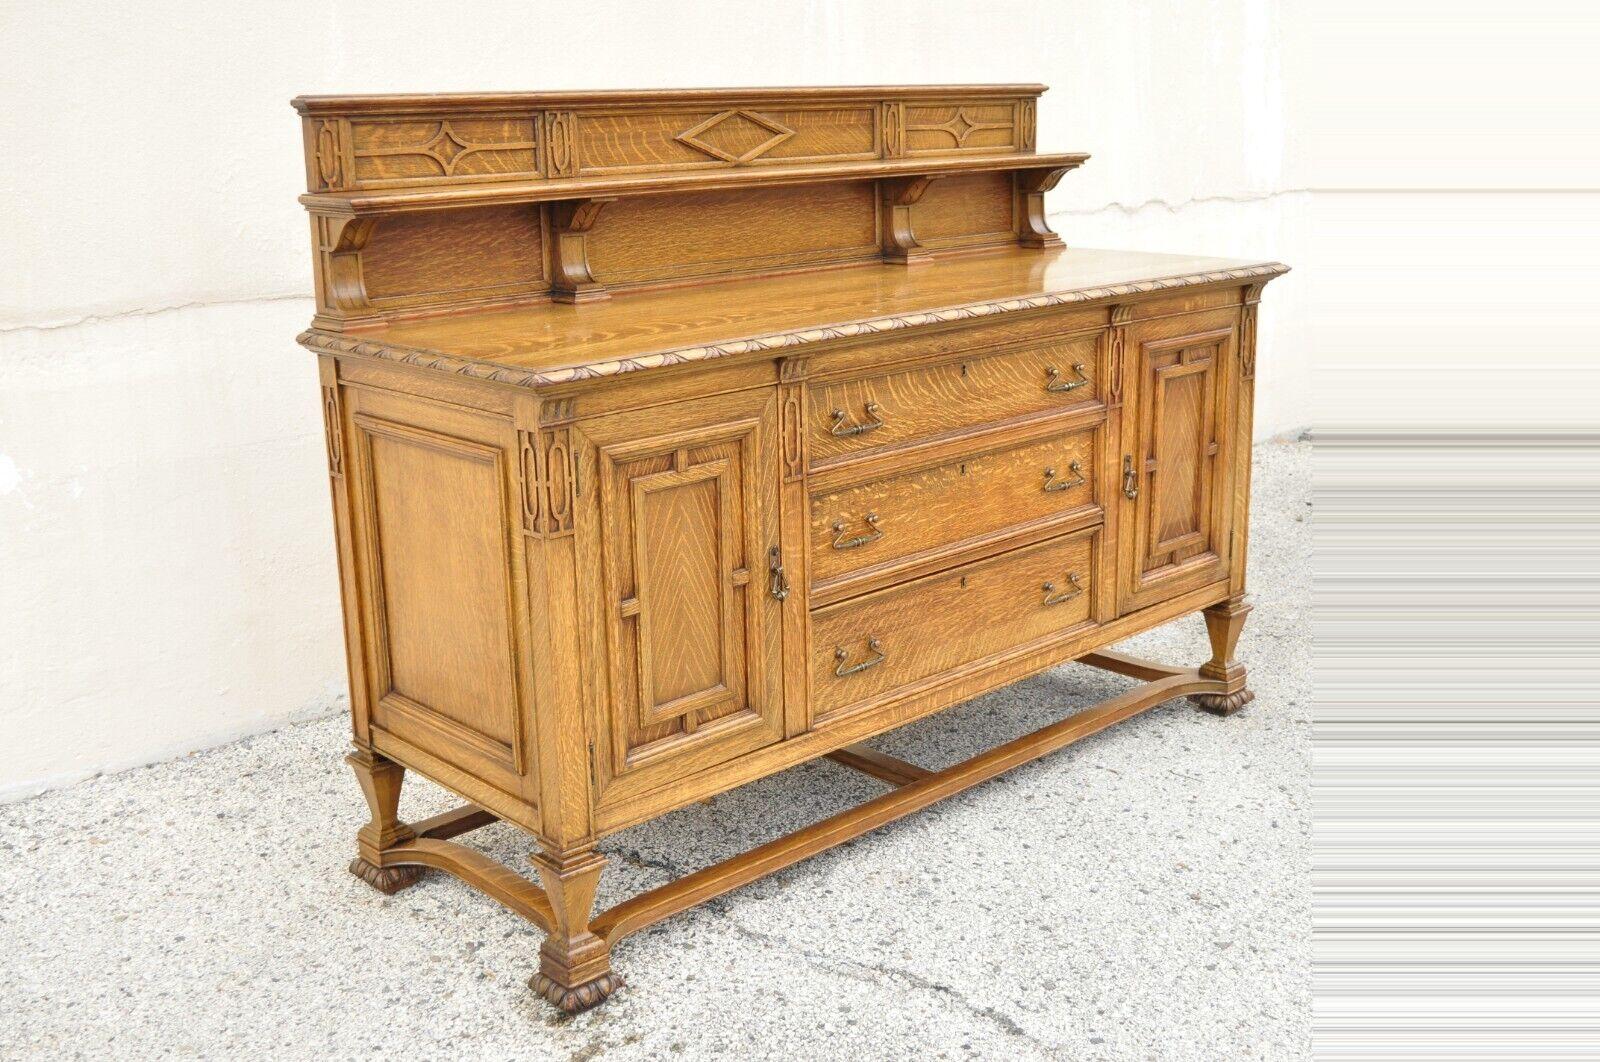 Antique Mission Oak Arts & Crafts Sideboard Buffet by Grand Rapids Furniture Co. Item features a carved backsplash with shelf, carved stretcher base, unique copper hardware, beautiful wood grain, 2 swing doors, original label, 3 dovetailed drawers,